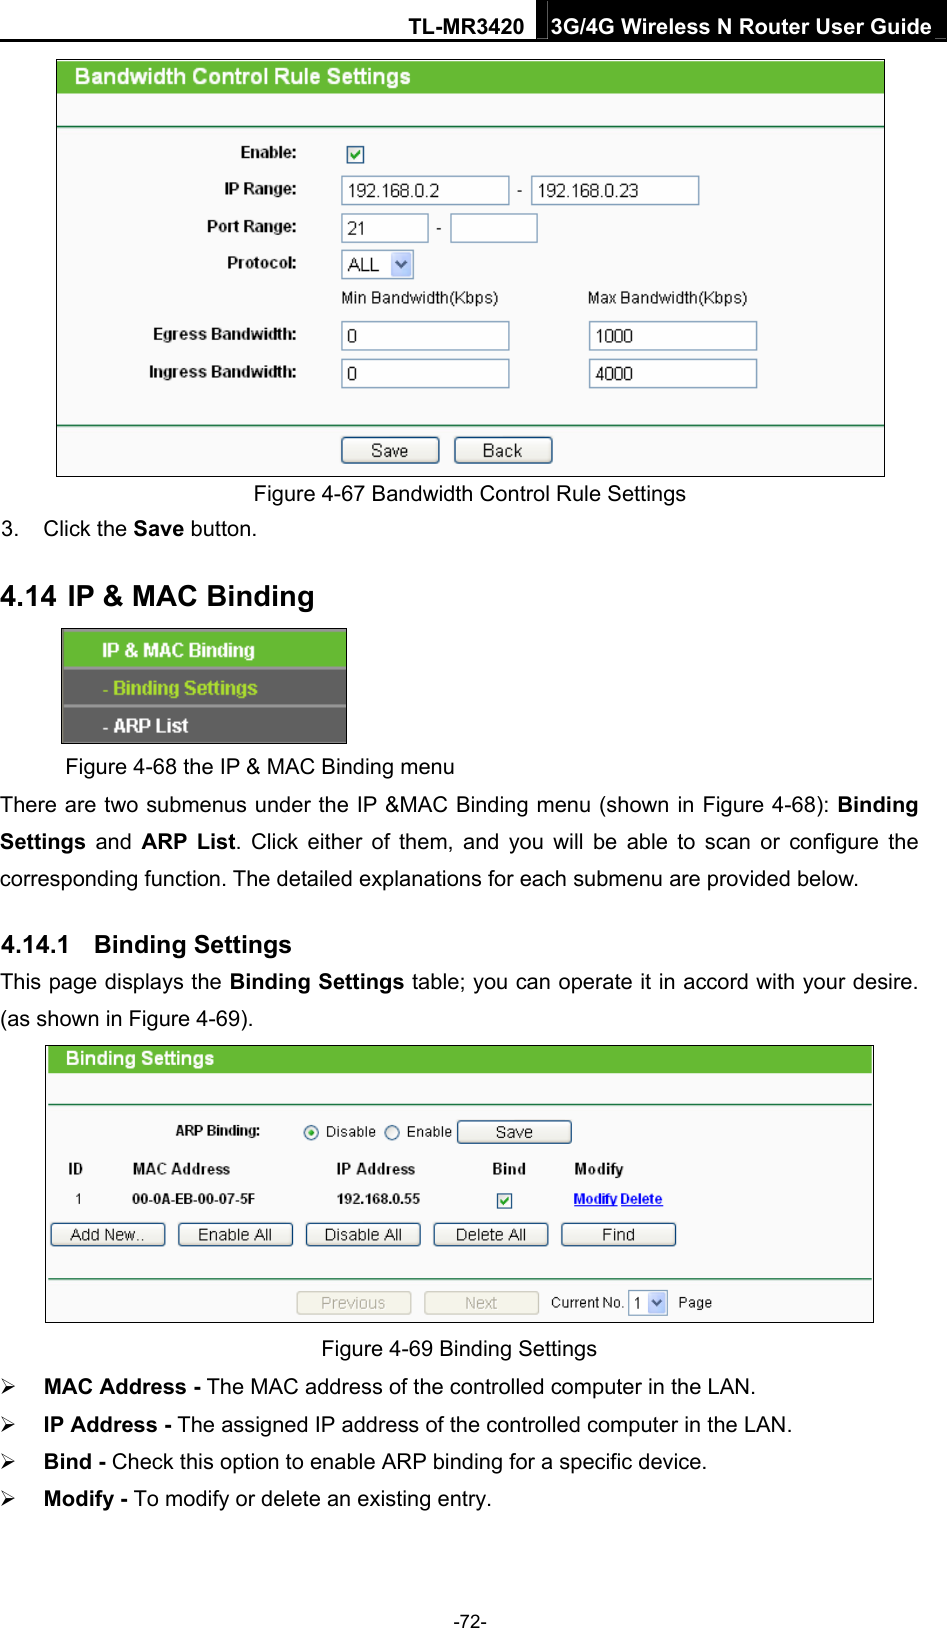 TL-MR3420 3G/4G Wireless N Router User Guide  Figure 4-67 Bandwidth Control Rule Settings 3. Click the Save button. 4.14 IP &amp; MAC Binding  Figure 4-68 the IP &amp; MAC Binding menu There are two submenus under the IP &amp;MAC Binding menu (shown in Figure 4-68): Binding Settings  and ARP List. Click either of them, and you will be able to scan or configure the corresponding function. The detailed explanations for each submenu are provided below. 4.14.1  Binding Settings This page displays the Binding Settings table; you can operate it in accord with your desire. (as shown in Figure 4-69).   Figure 4-69 Binding Settings  MAC Address - The MAC address of the controlled computer in the LAN.    IP Address - The assigned IP address of the controlled computer in the LAN.    Bind - Check this option to enable ARP binding for a specific device.    Modify - To modify or delete an existing entry.   -72- 